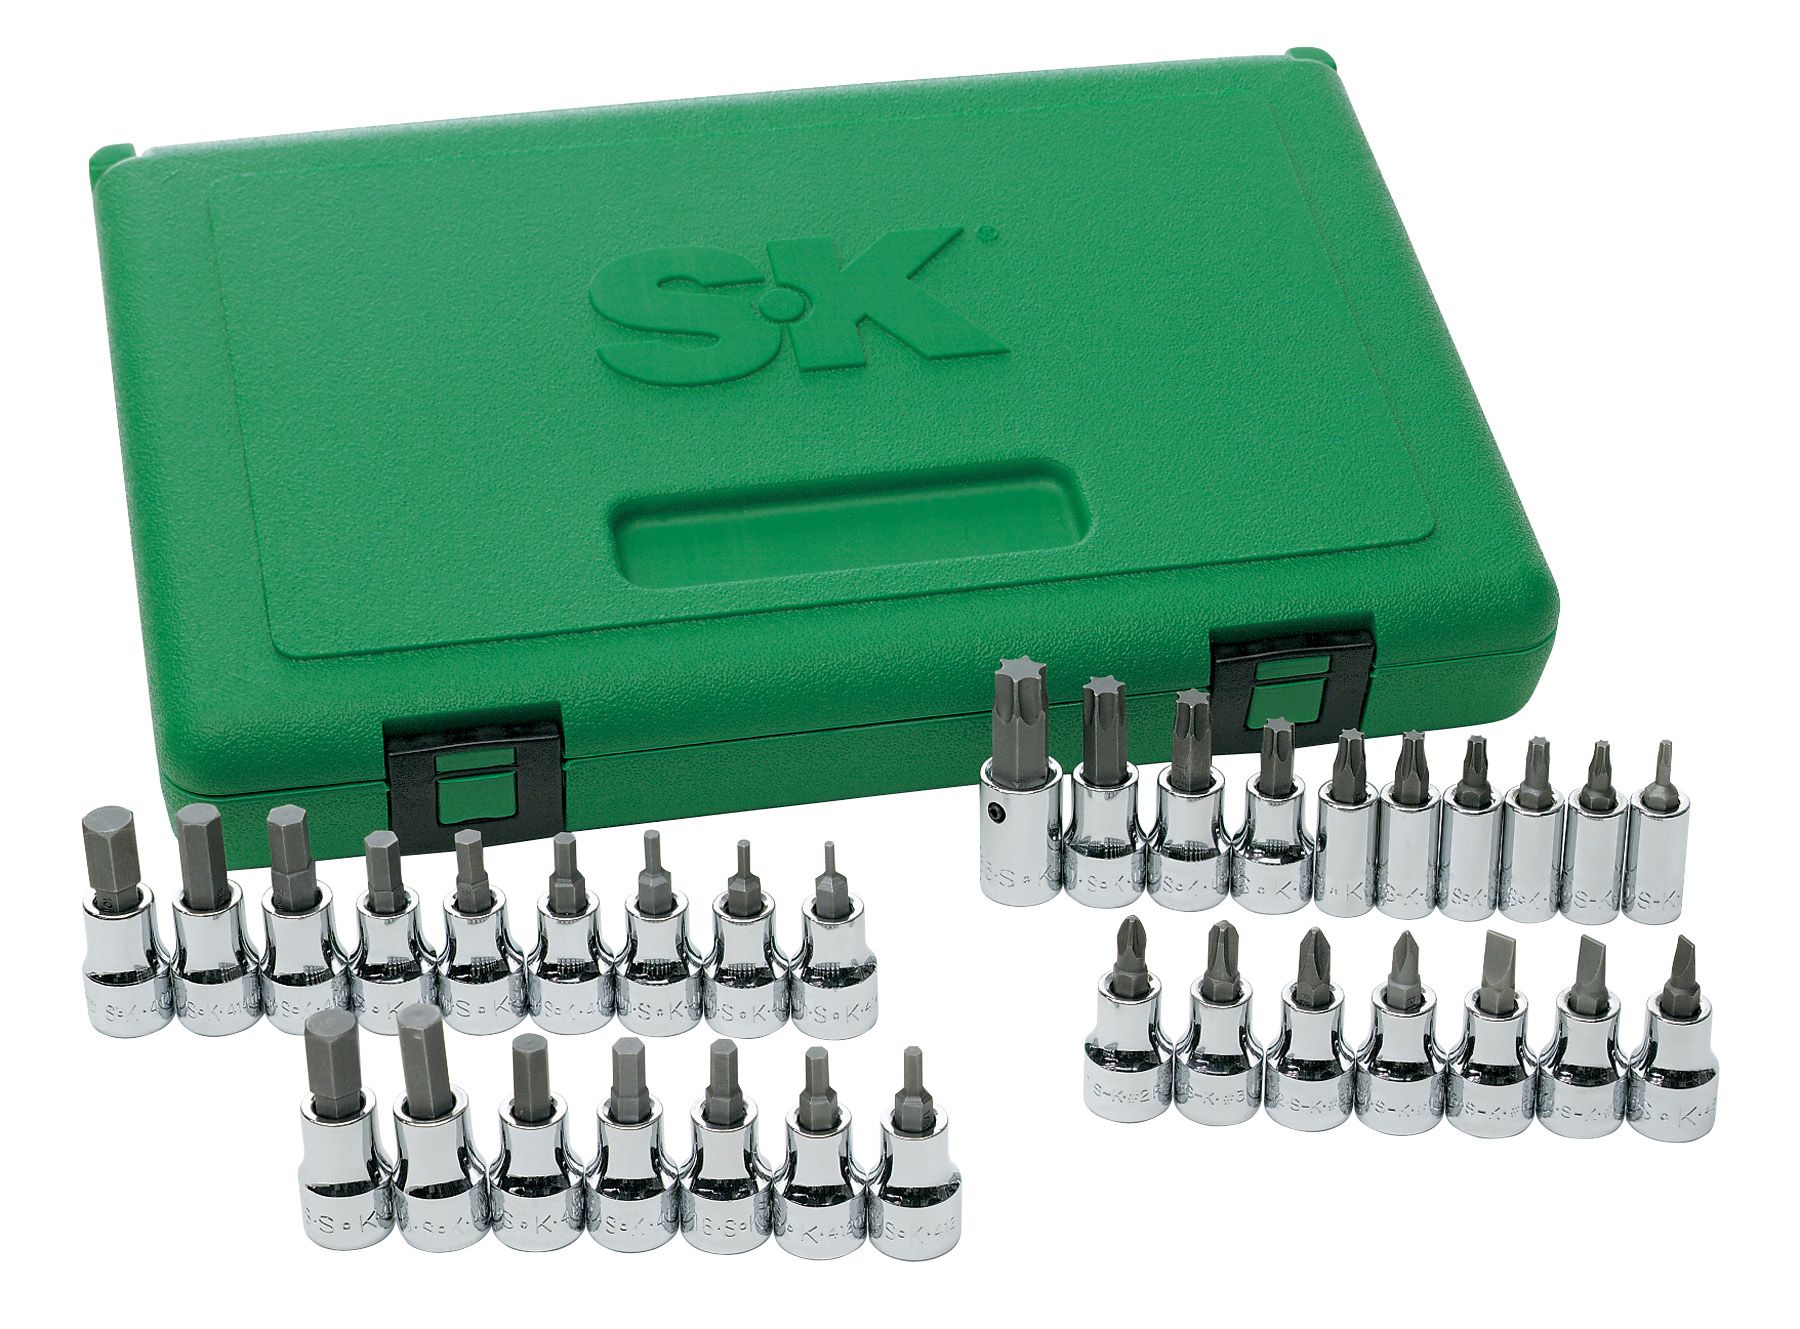 SK 33 Pc 1/4 in. and 3/8 in. Drive Bit Socket SuperSet